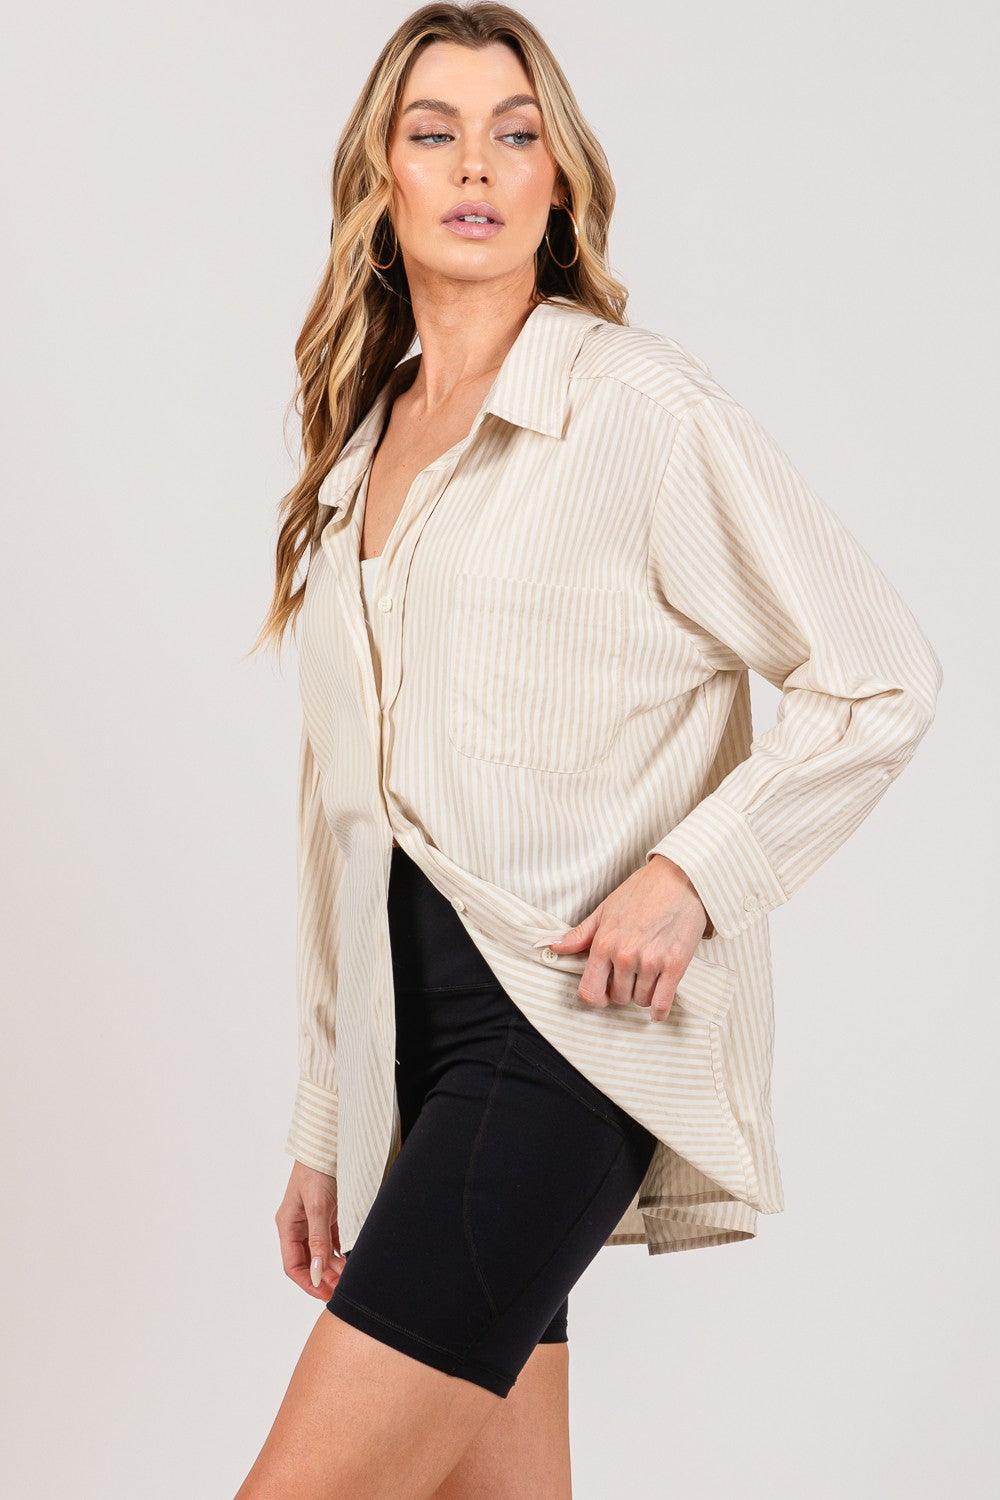 SAGE + FIG Striped Button Up Long Sleeve Shirt - Wildflower Hippies